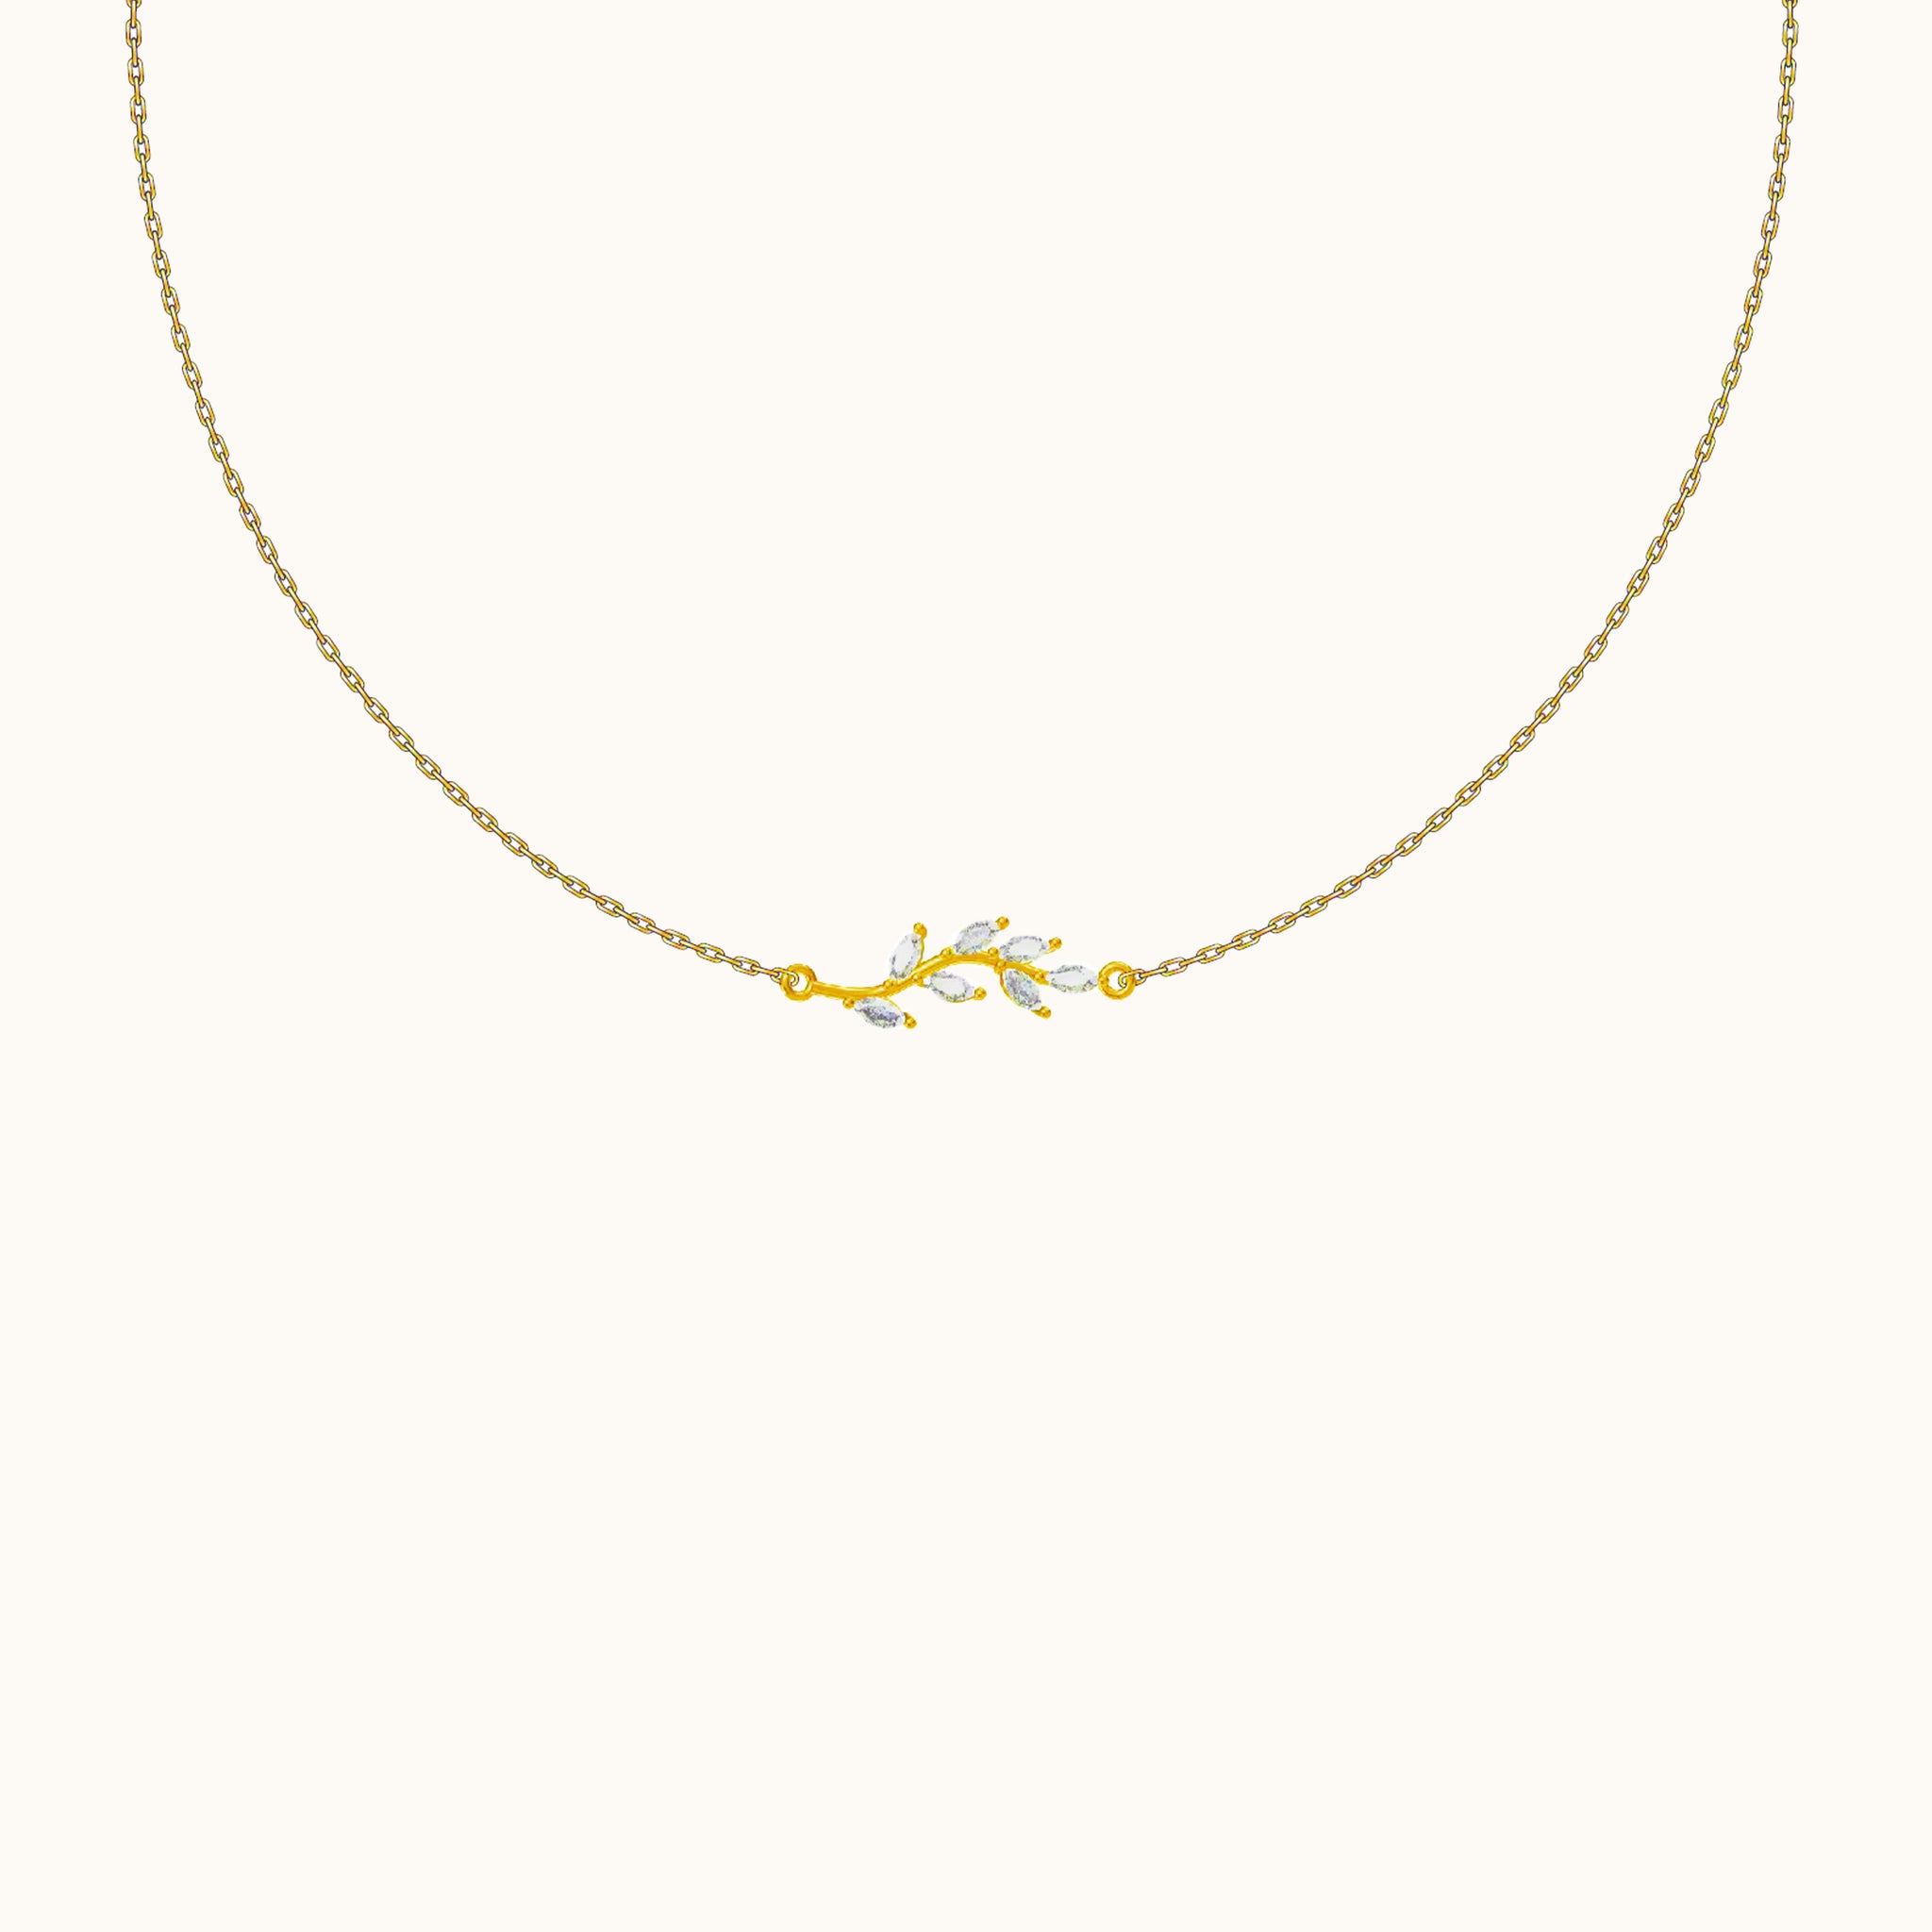 Plant Leaf Gemstone Charm Gold Cable Chain White CZ Leaves Necklace by Doviana